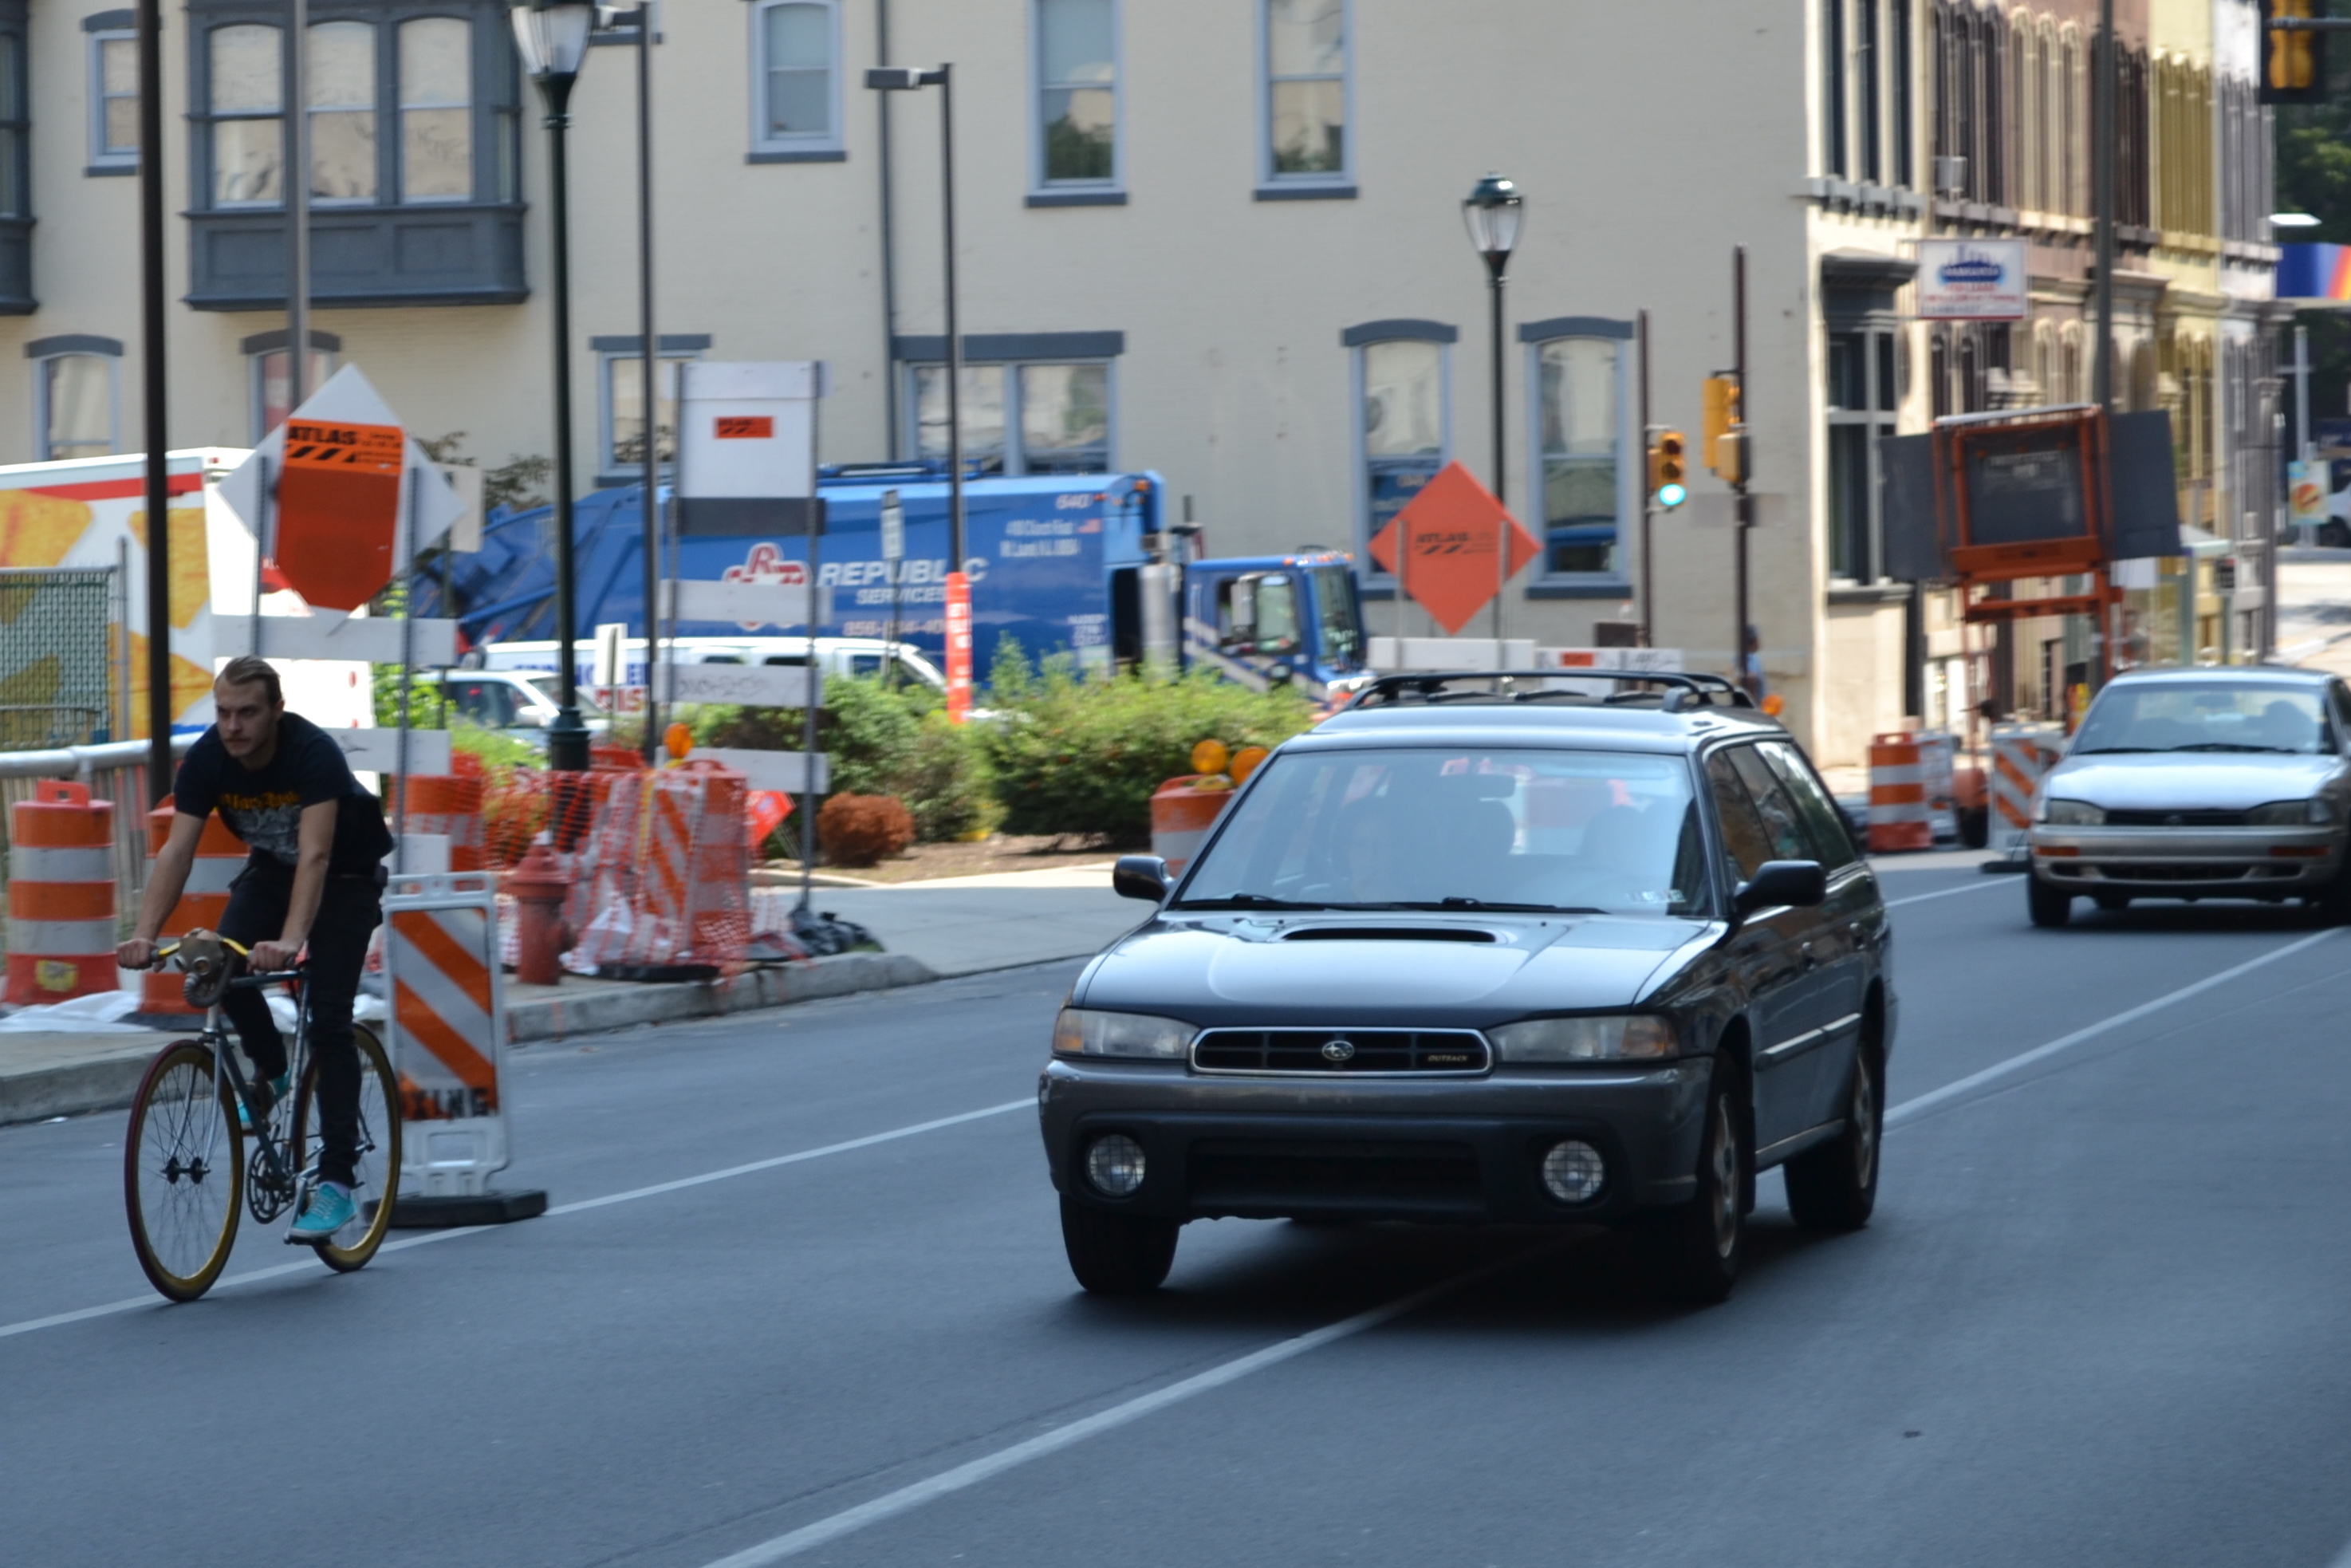 Complete streets bill clarifies more than it changes